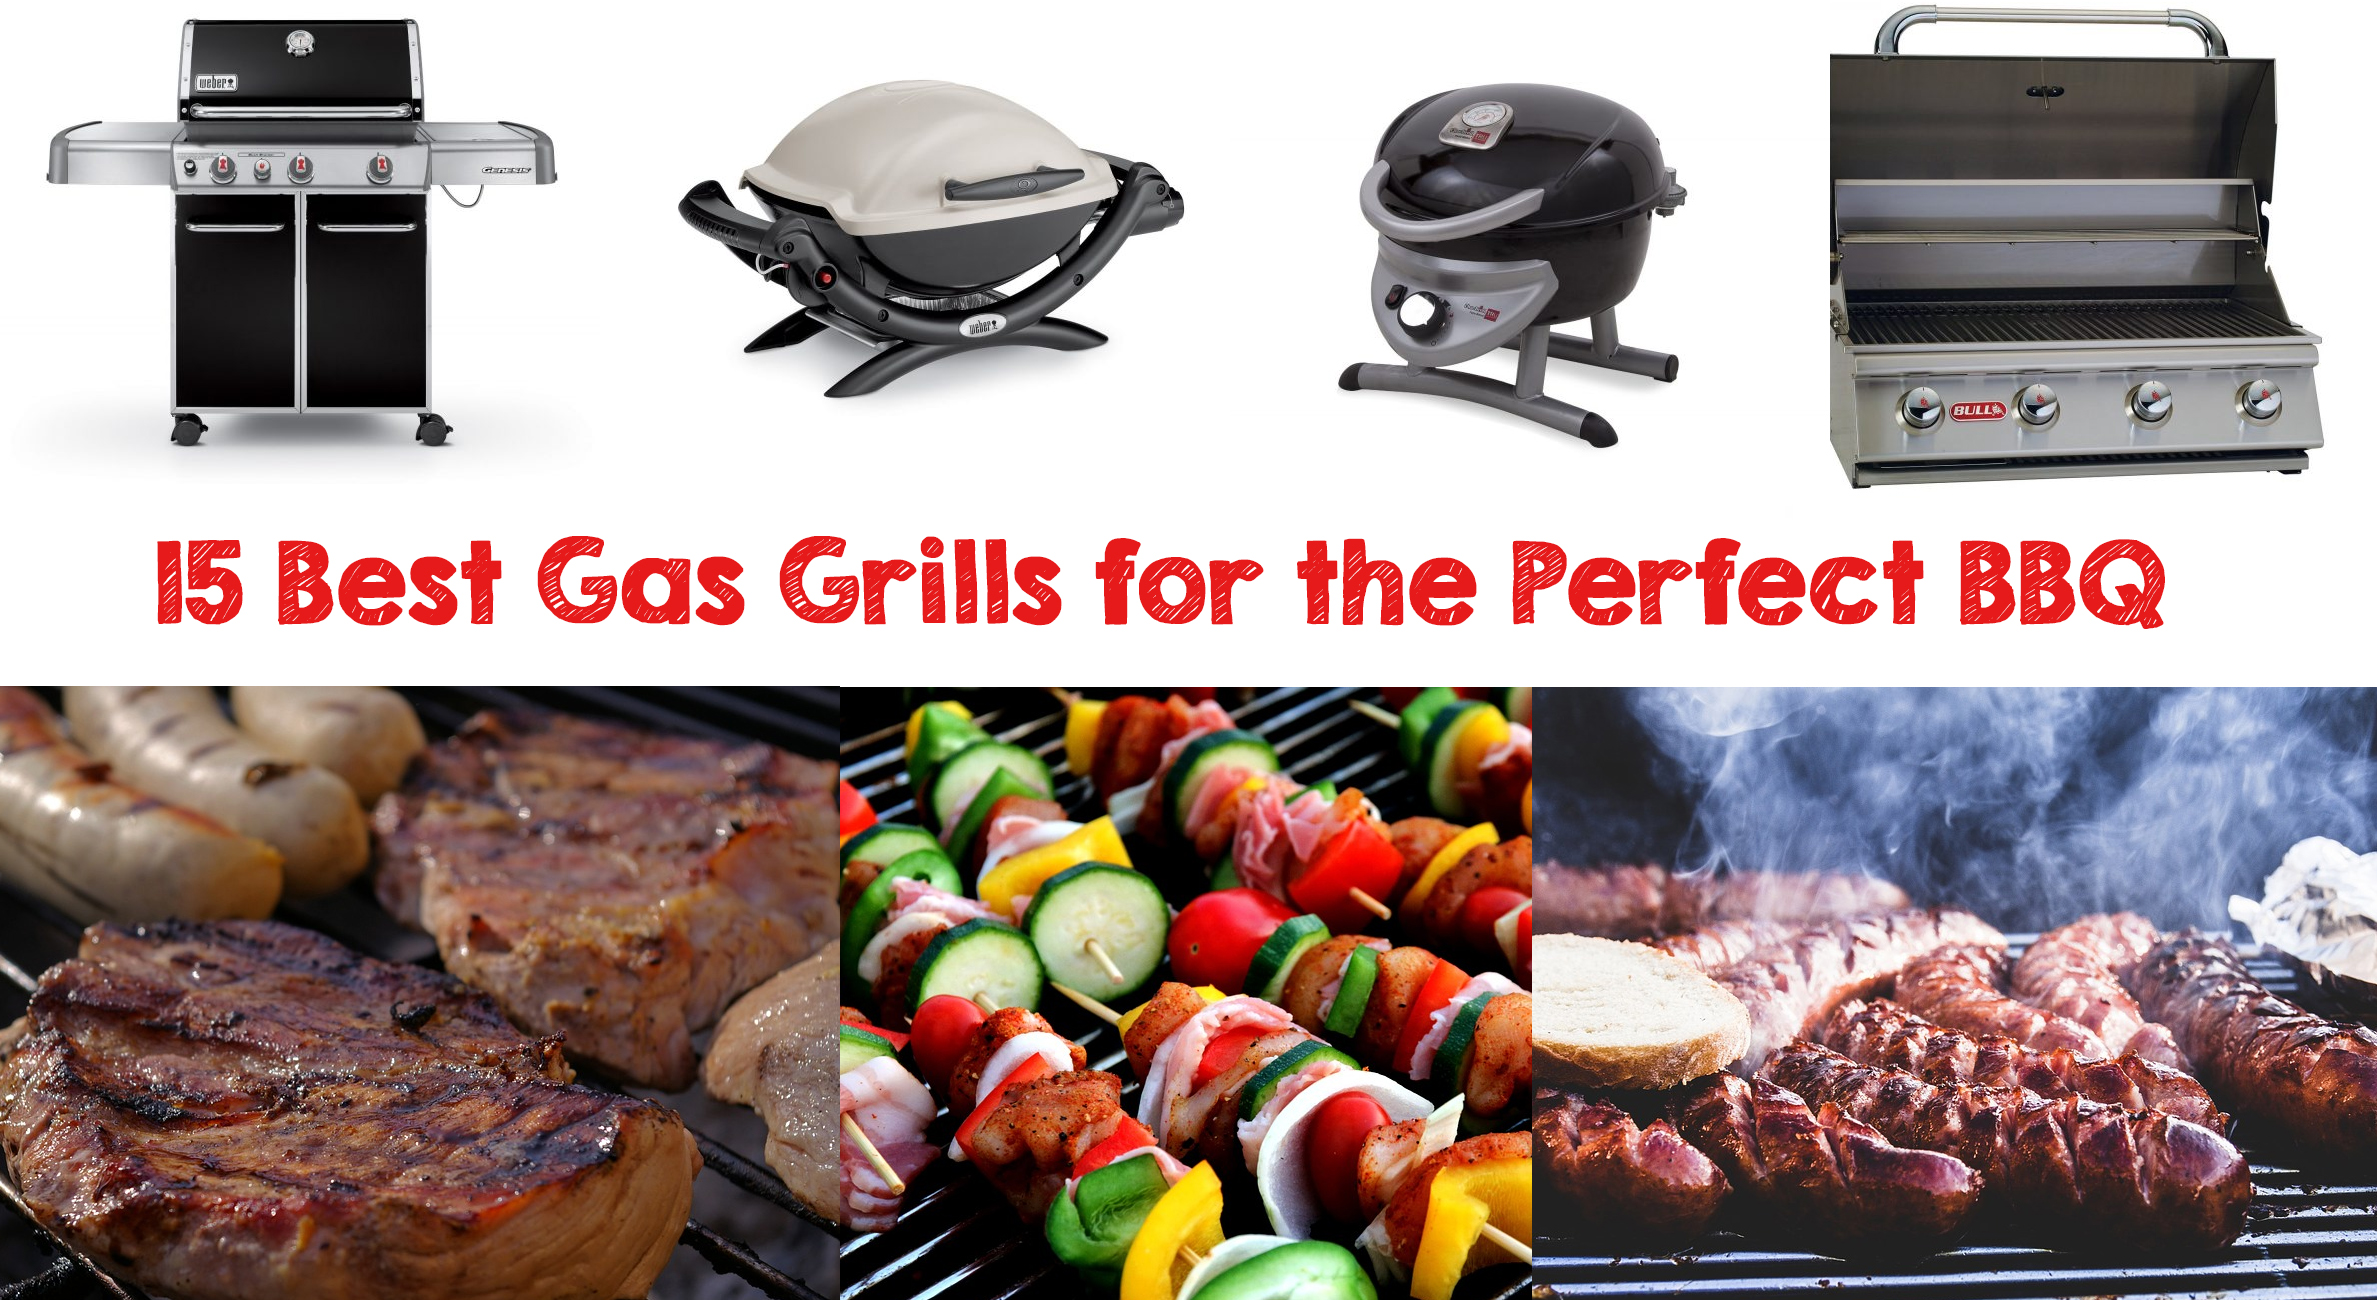 15 Best Gas Grills for the Perfect BBQ